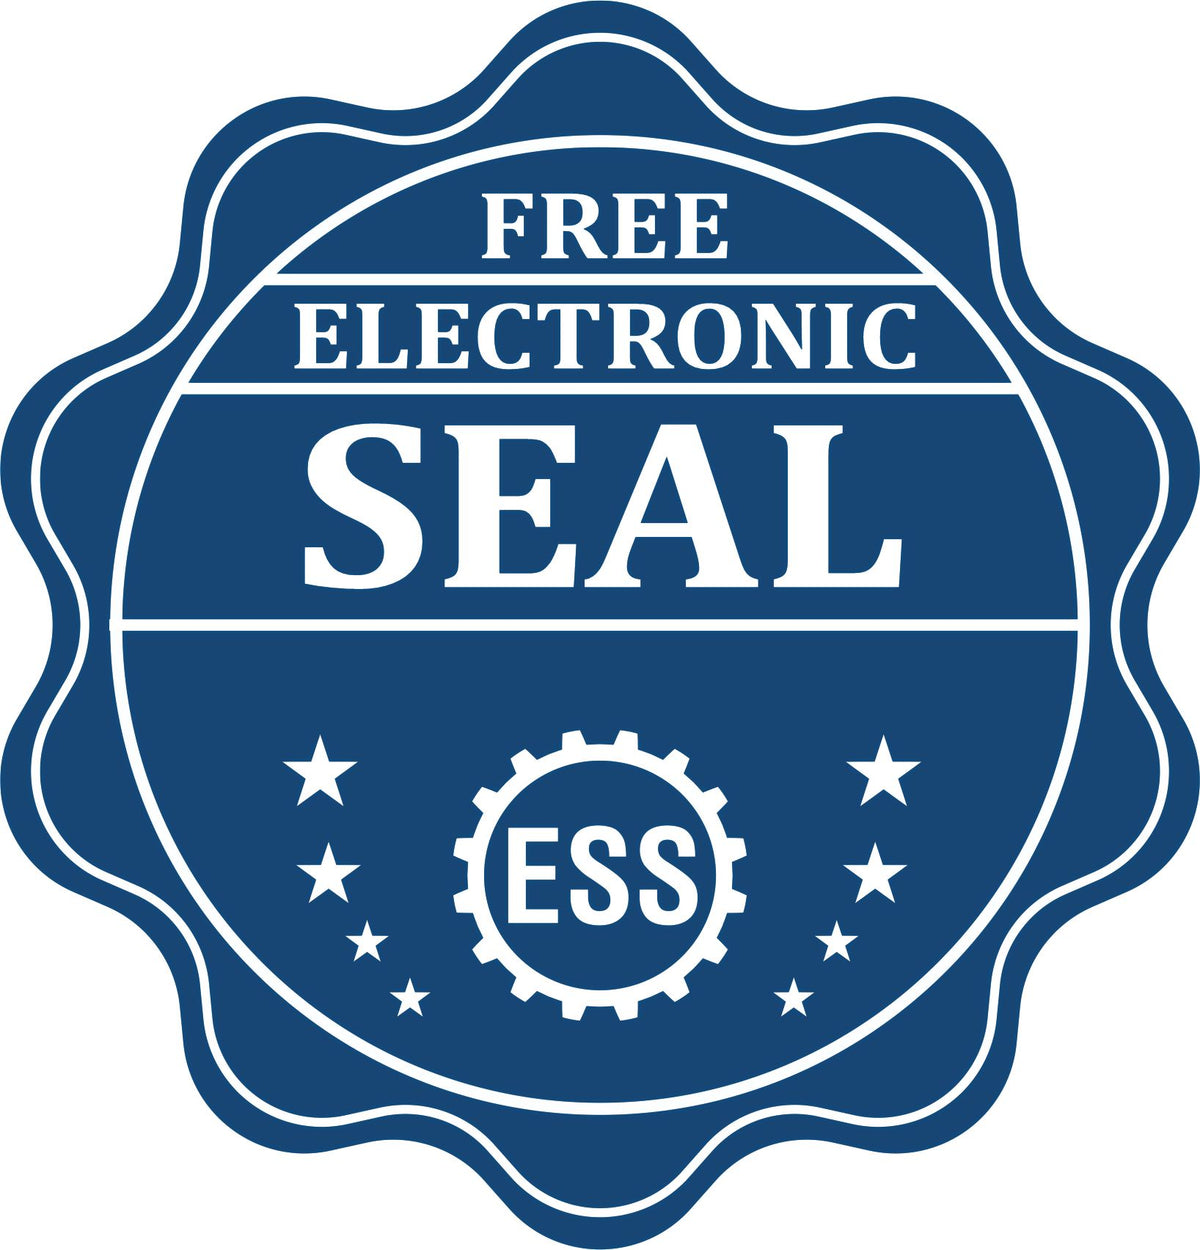 A badge showing a free electronic seal for the Gift New York Architect Seal with stars and the ESS gear on the emblem.